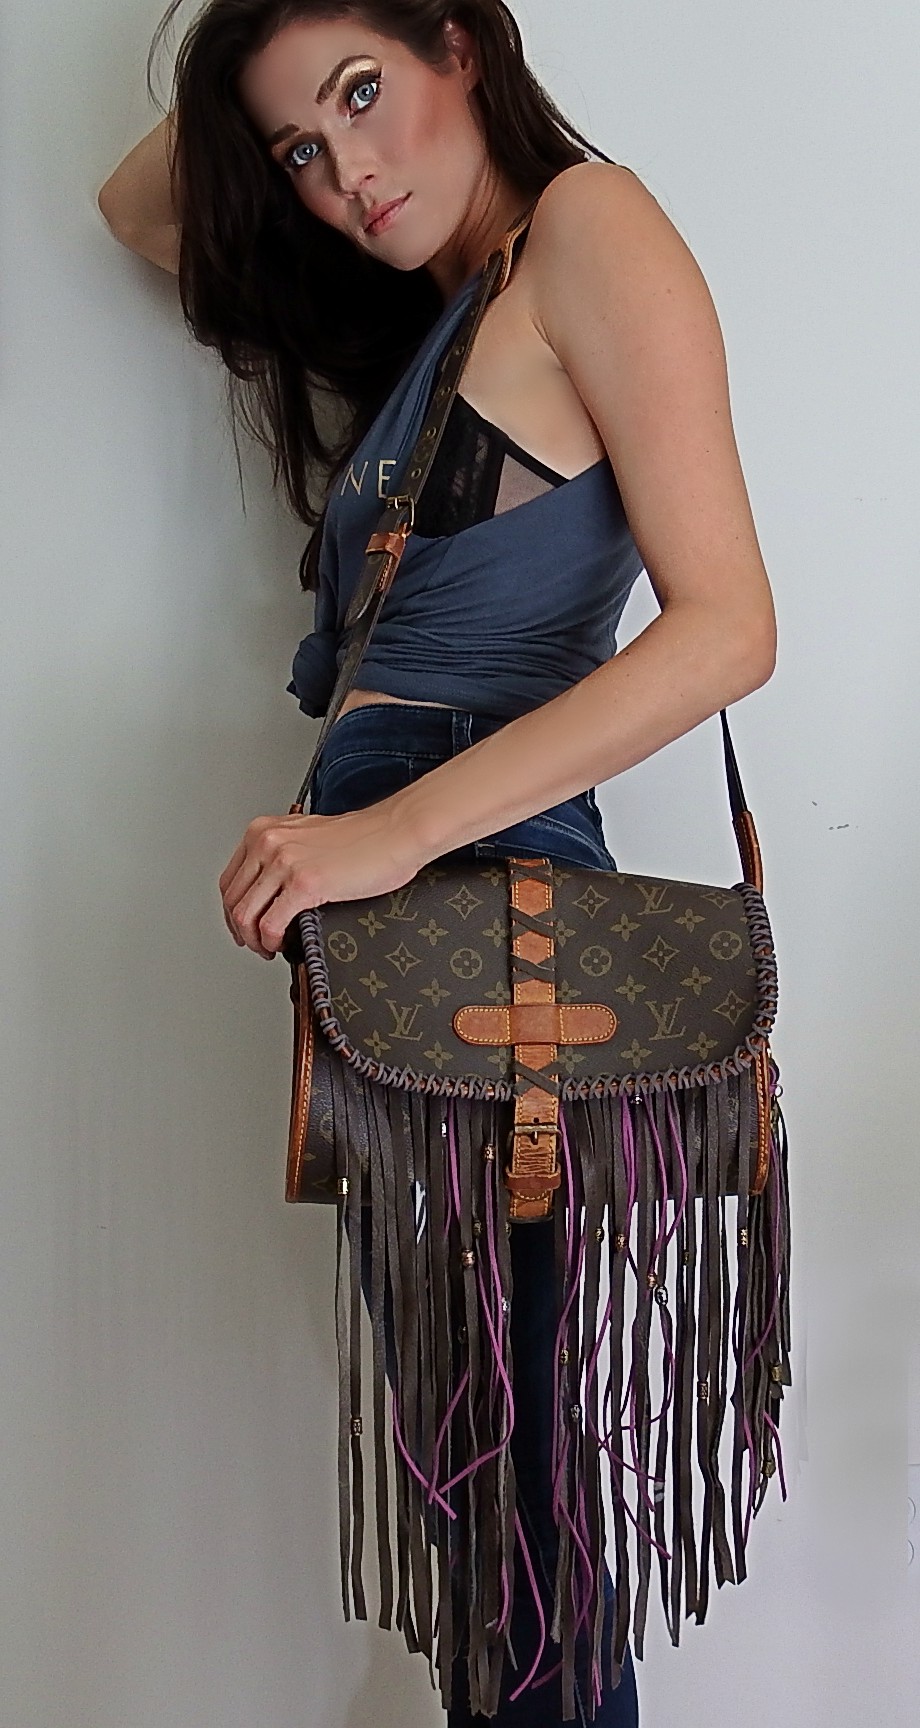 The Champagne Bag Petit Louis Vuitton fringe upcycle